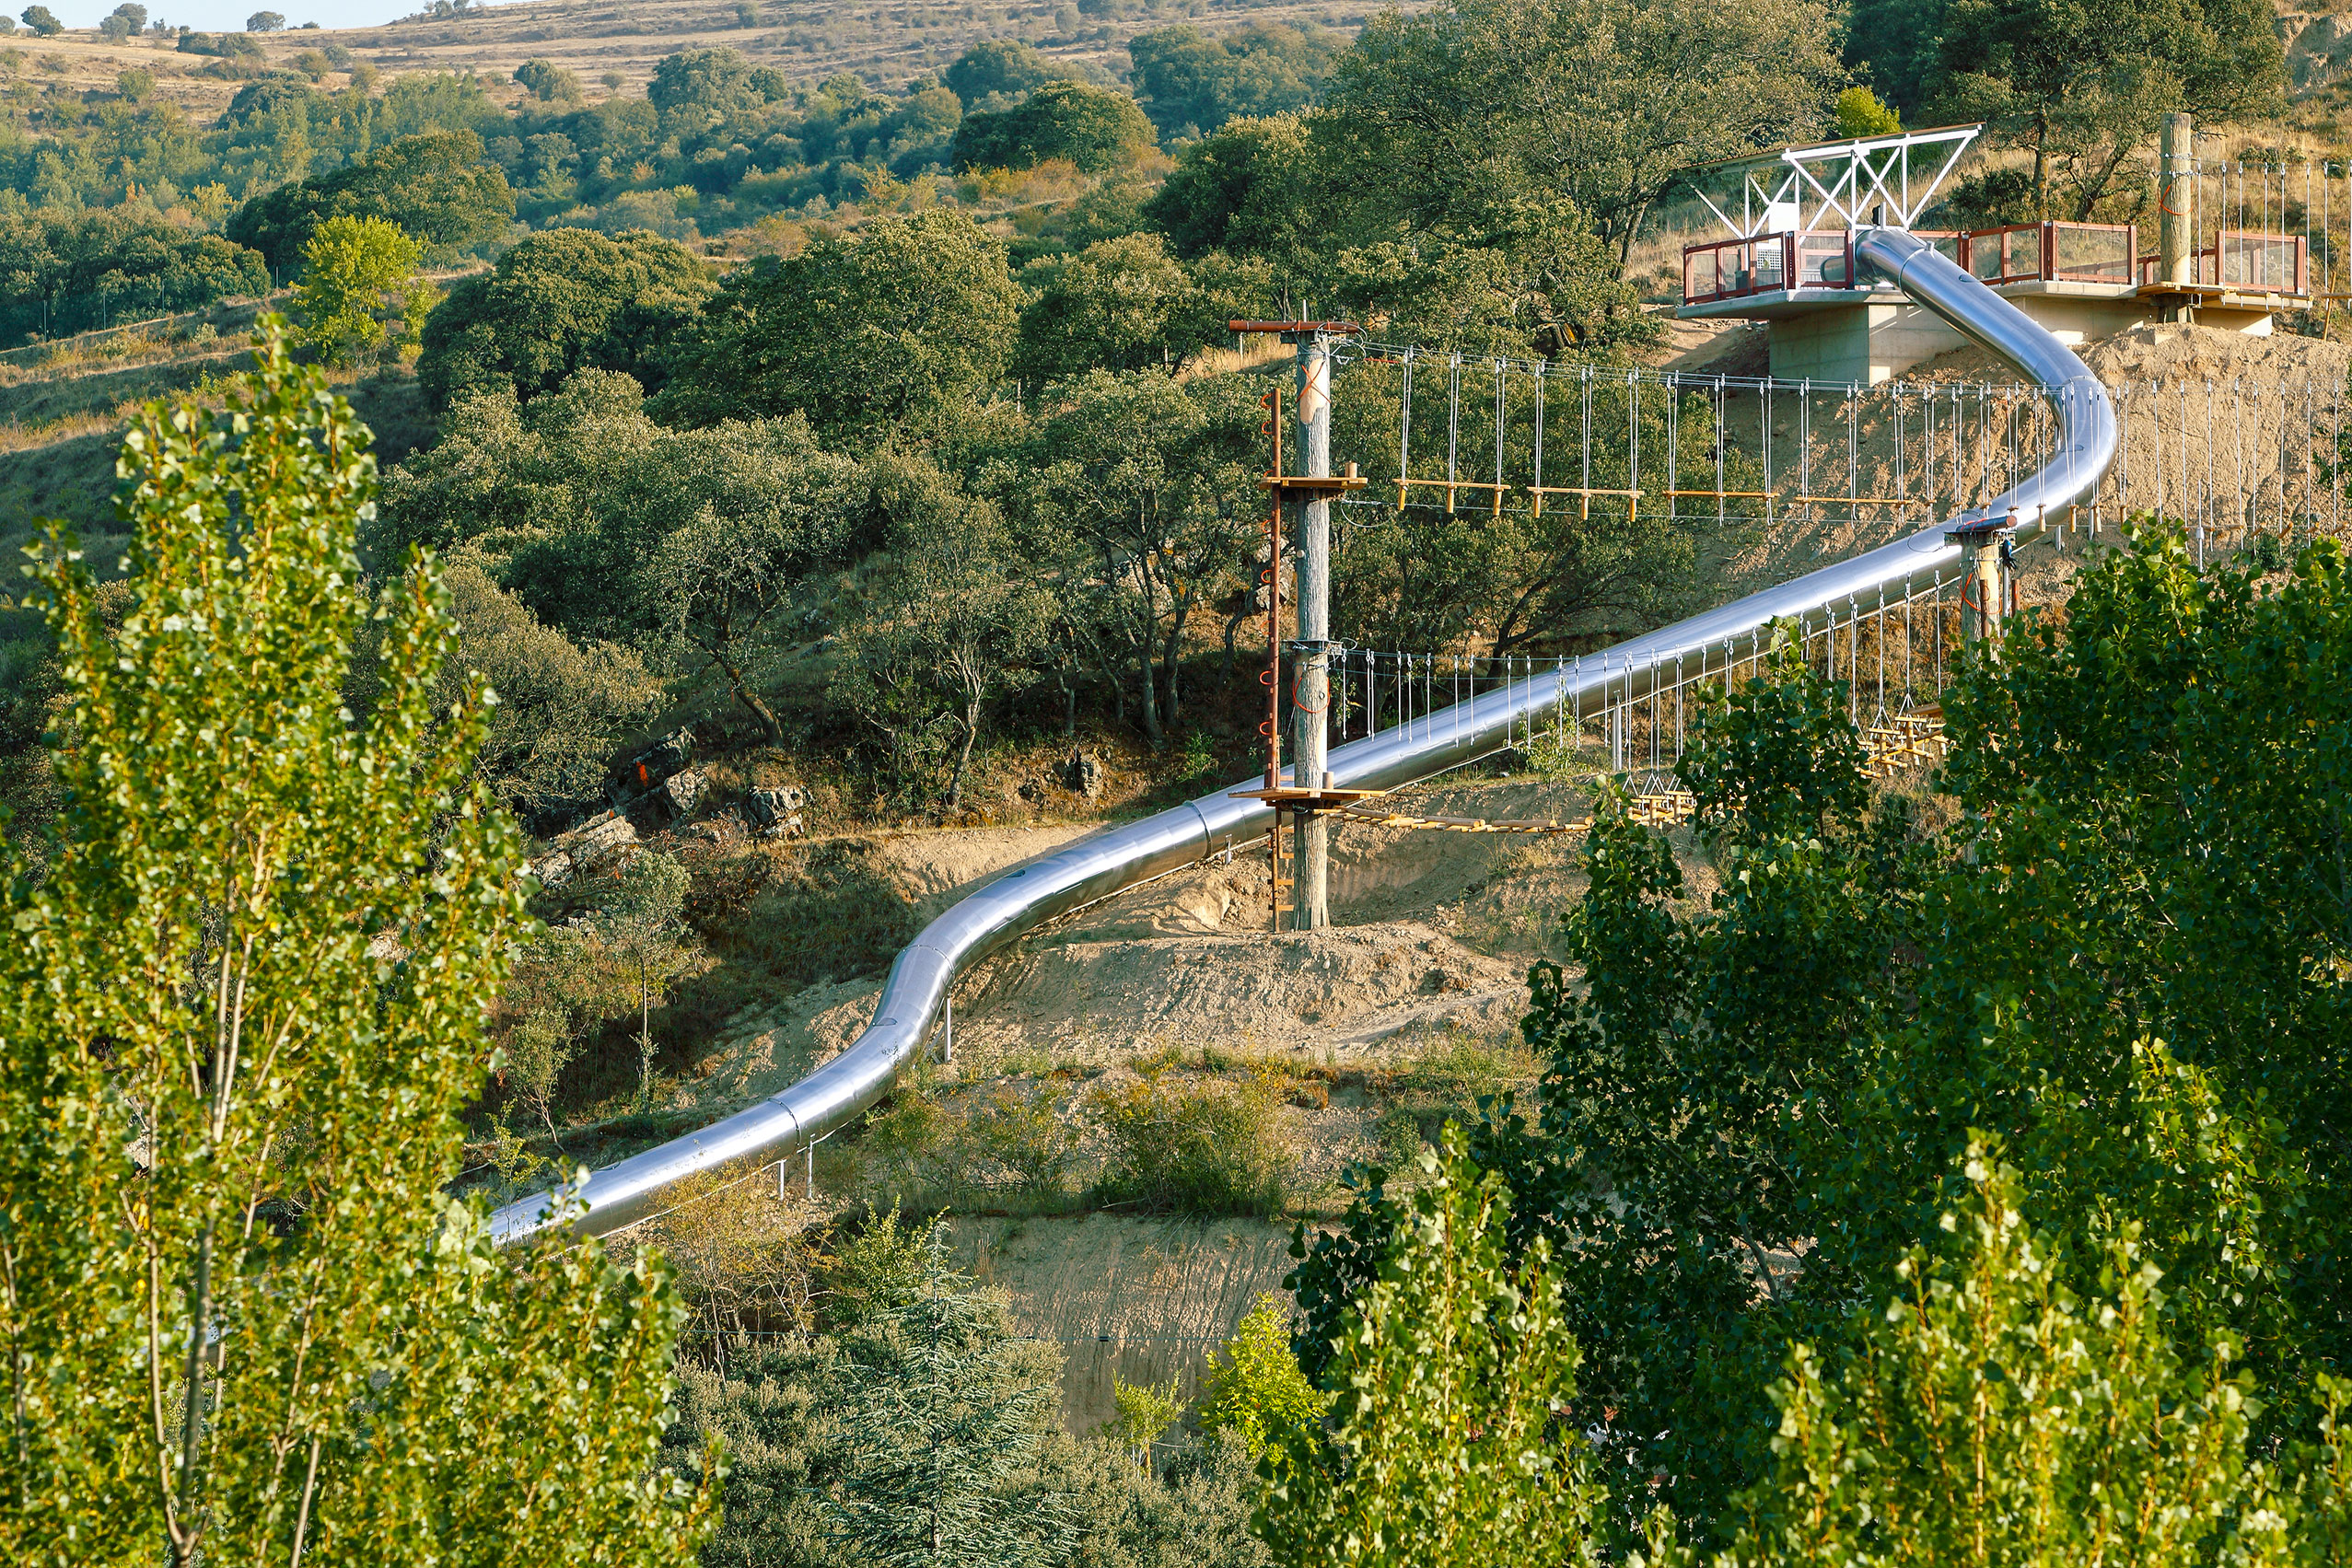 atlantics stainless steel slides the lost canyon enciso spain experience amusement parks hang mats tubes tunnel slope